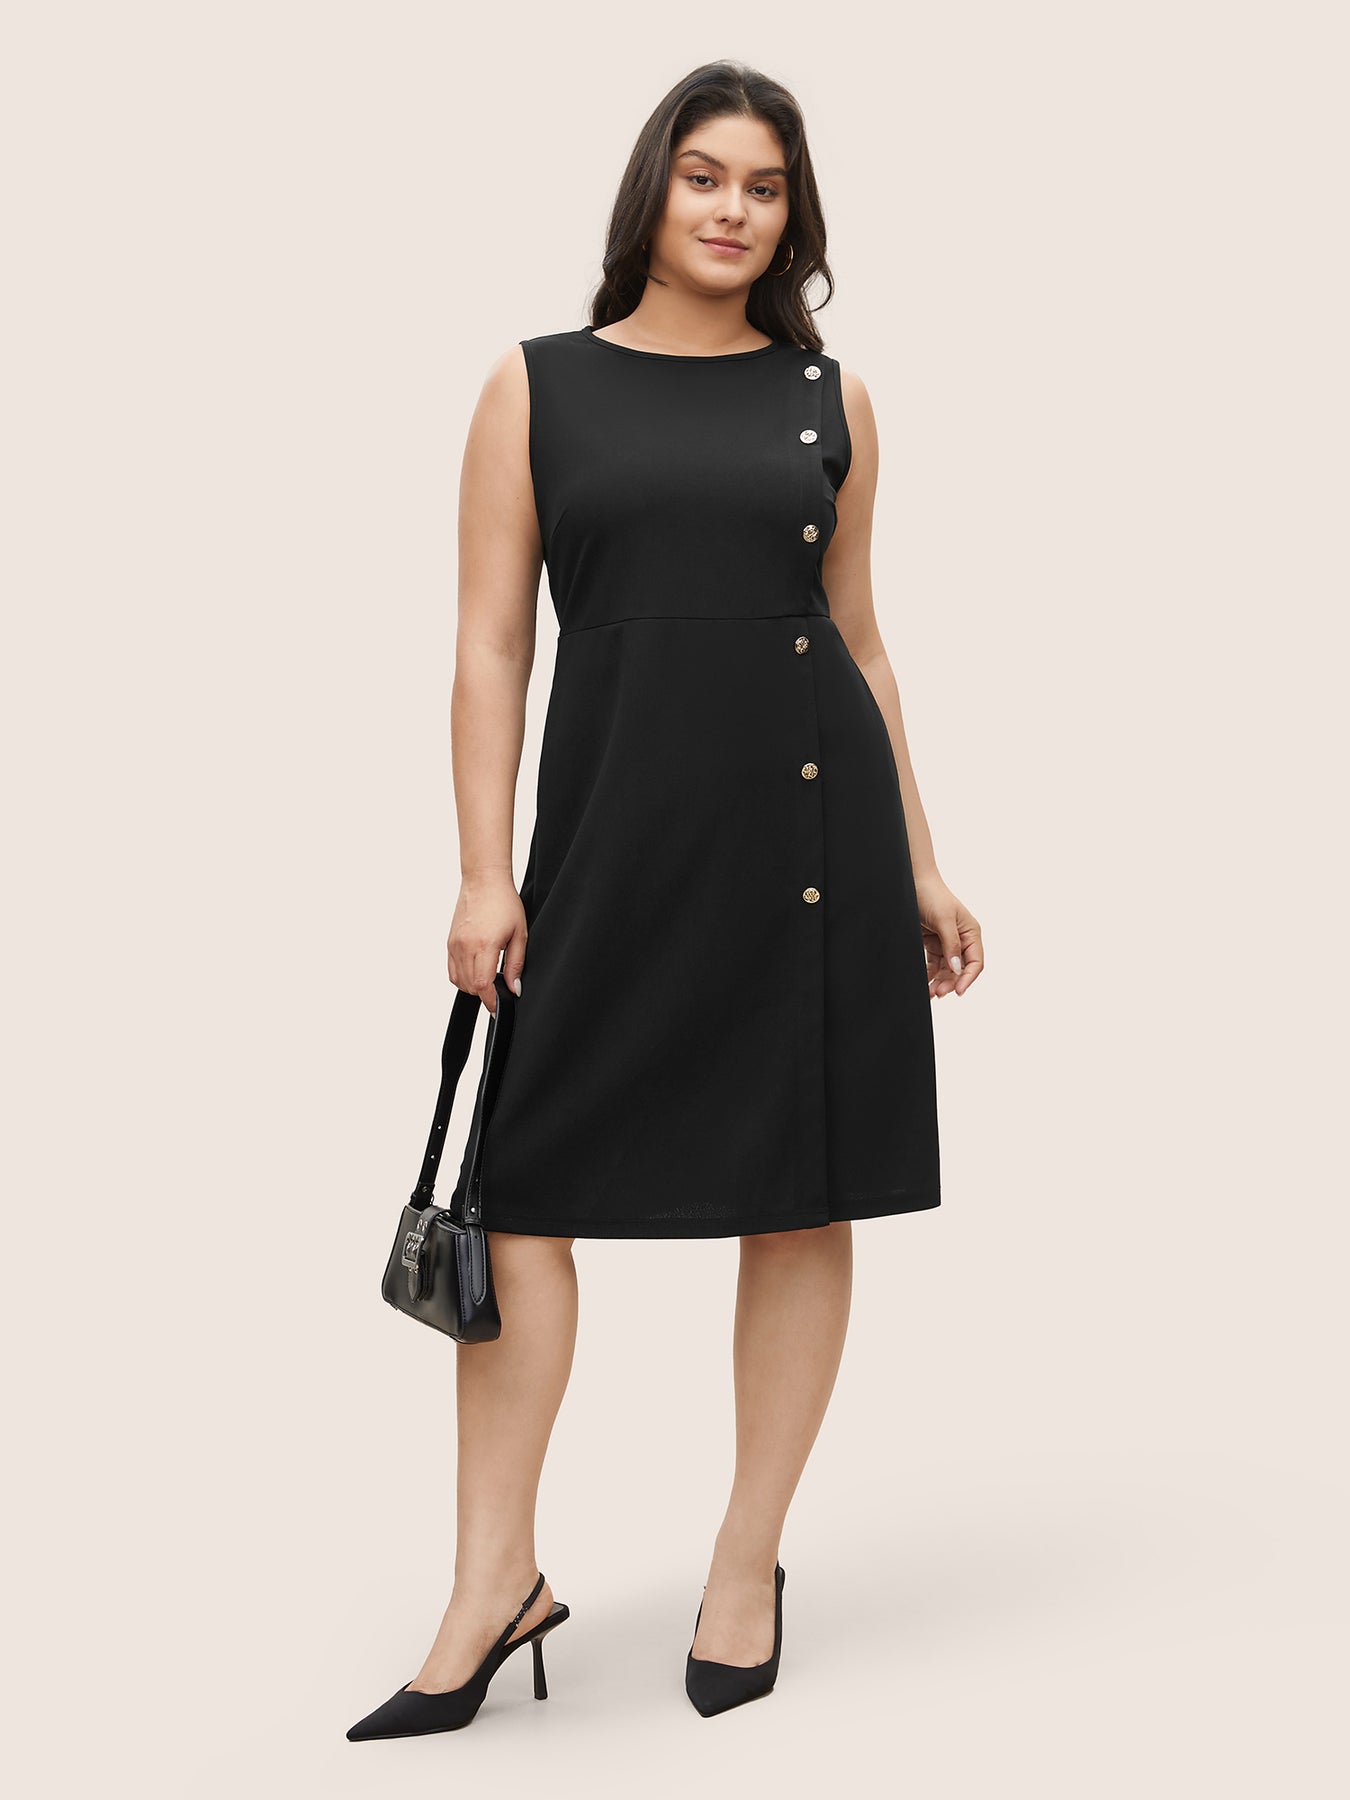 Plus Size Dresses  BloomChic – Tagged 18-20/2X